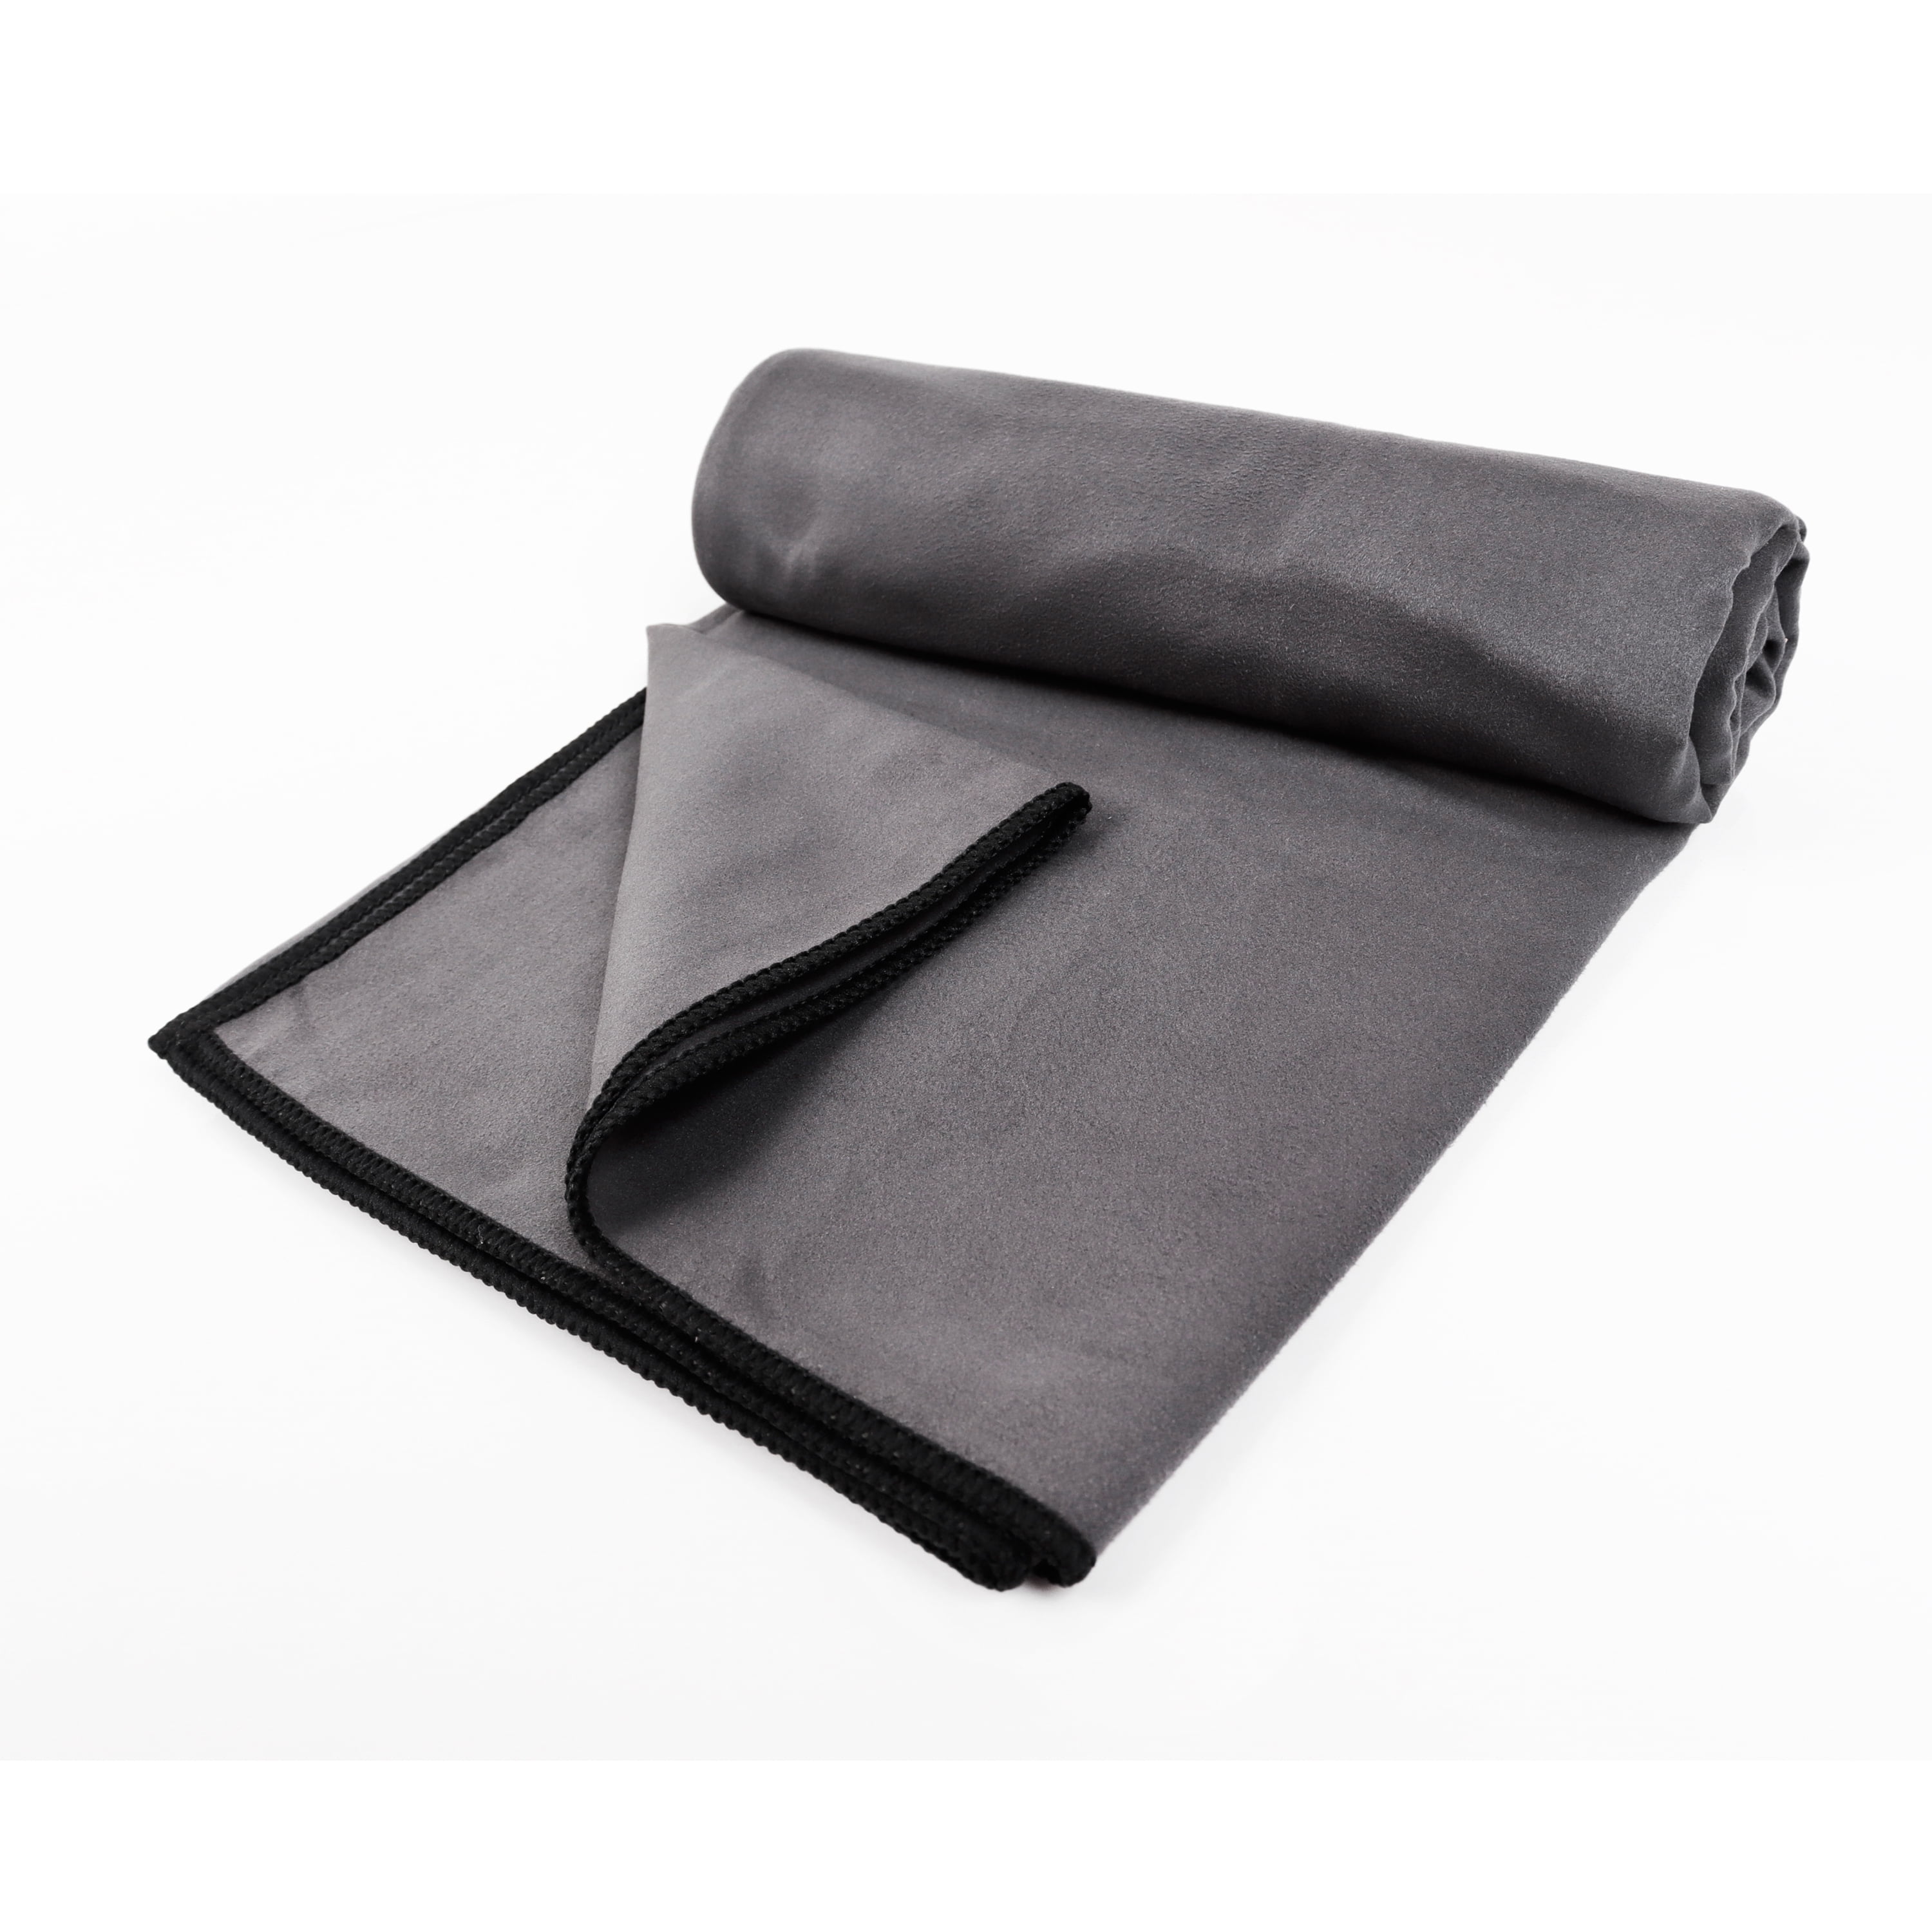 Wiselife Microfibre Yoga Mat Towel/Cover (6 ft by 2 ft) at Rs 556